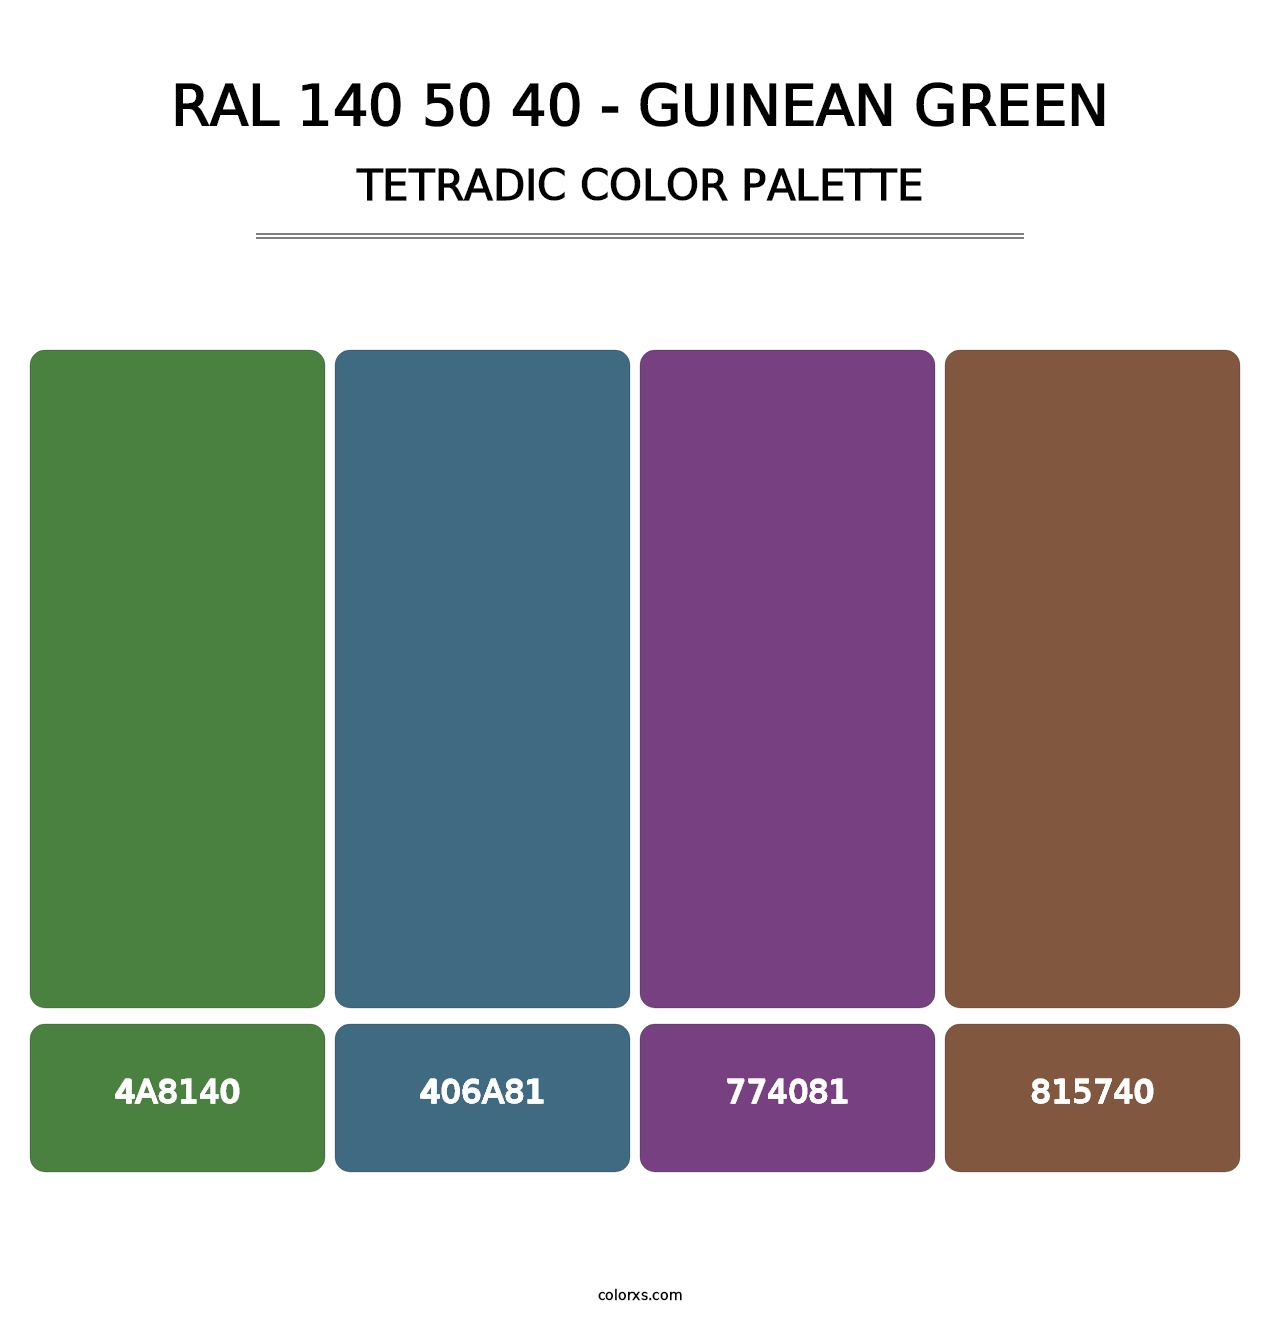 RAL 140 50 40 - Guinean Green - Tetradic Color Palette